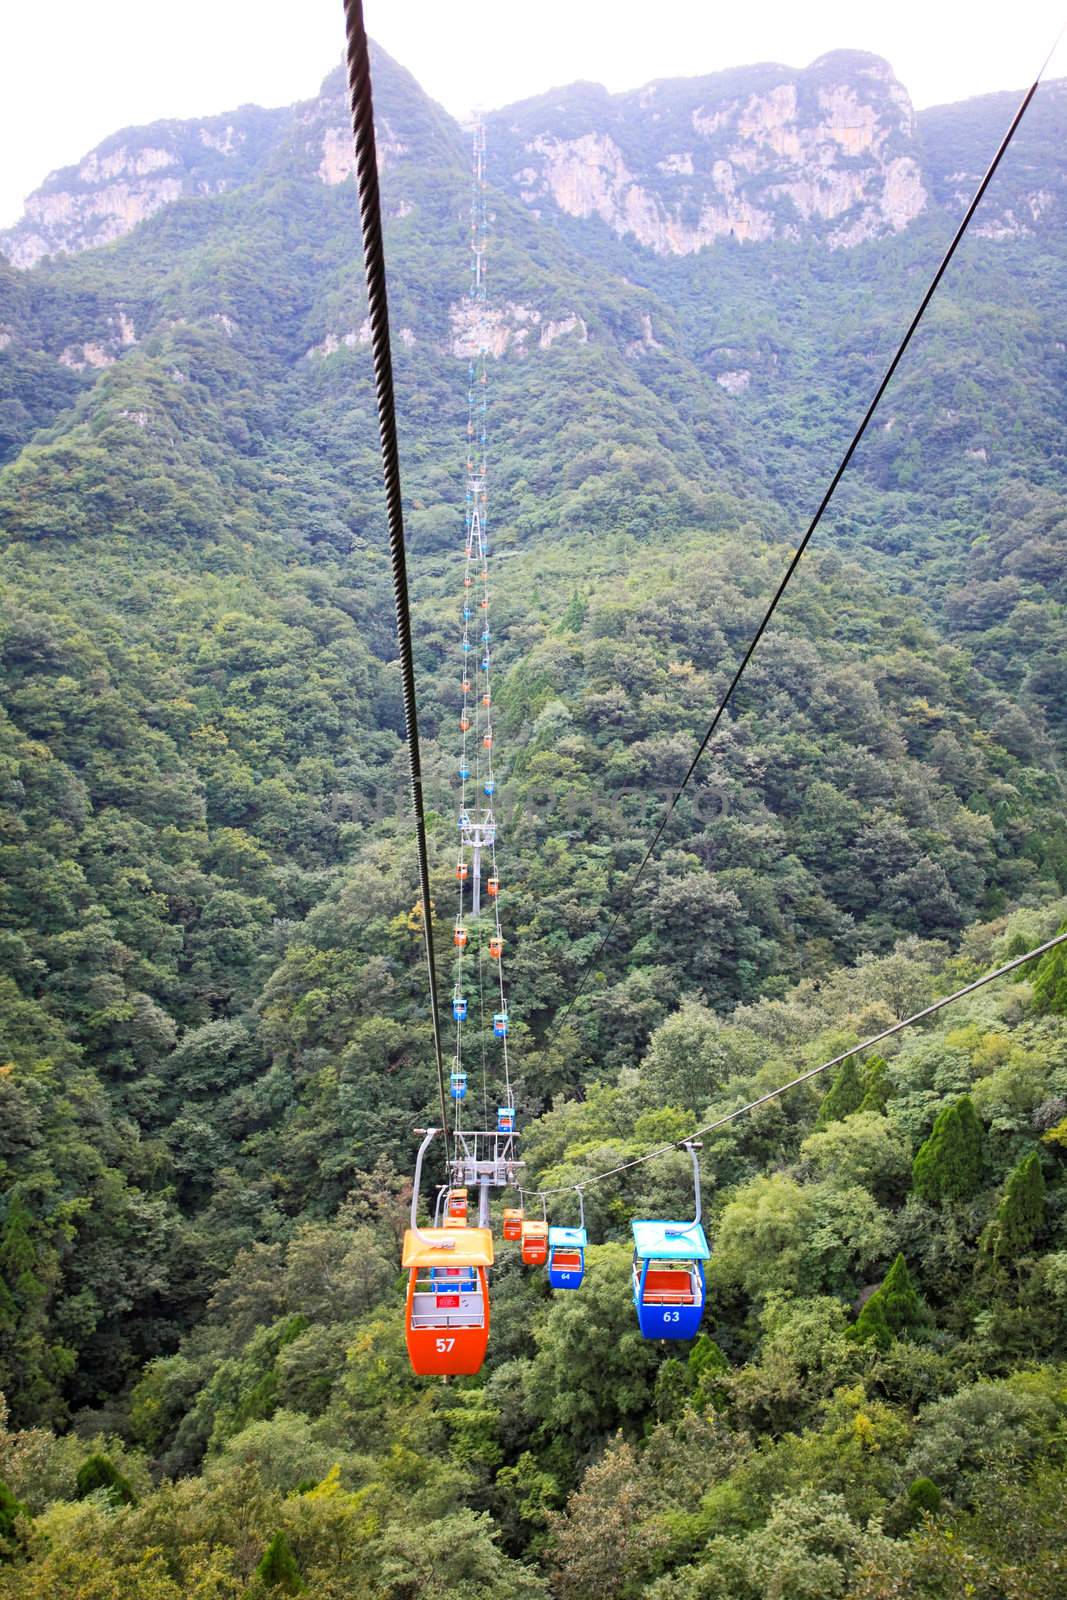 The cable cars at Yun-Tai Mountain, a World Geologic Park by gary718